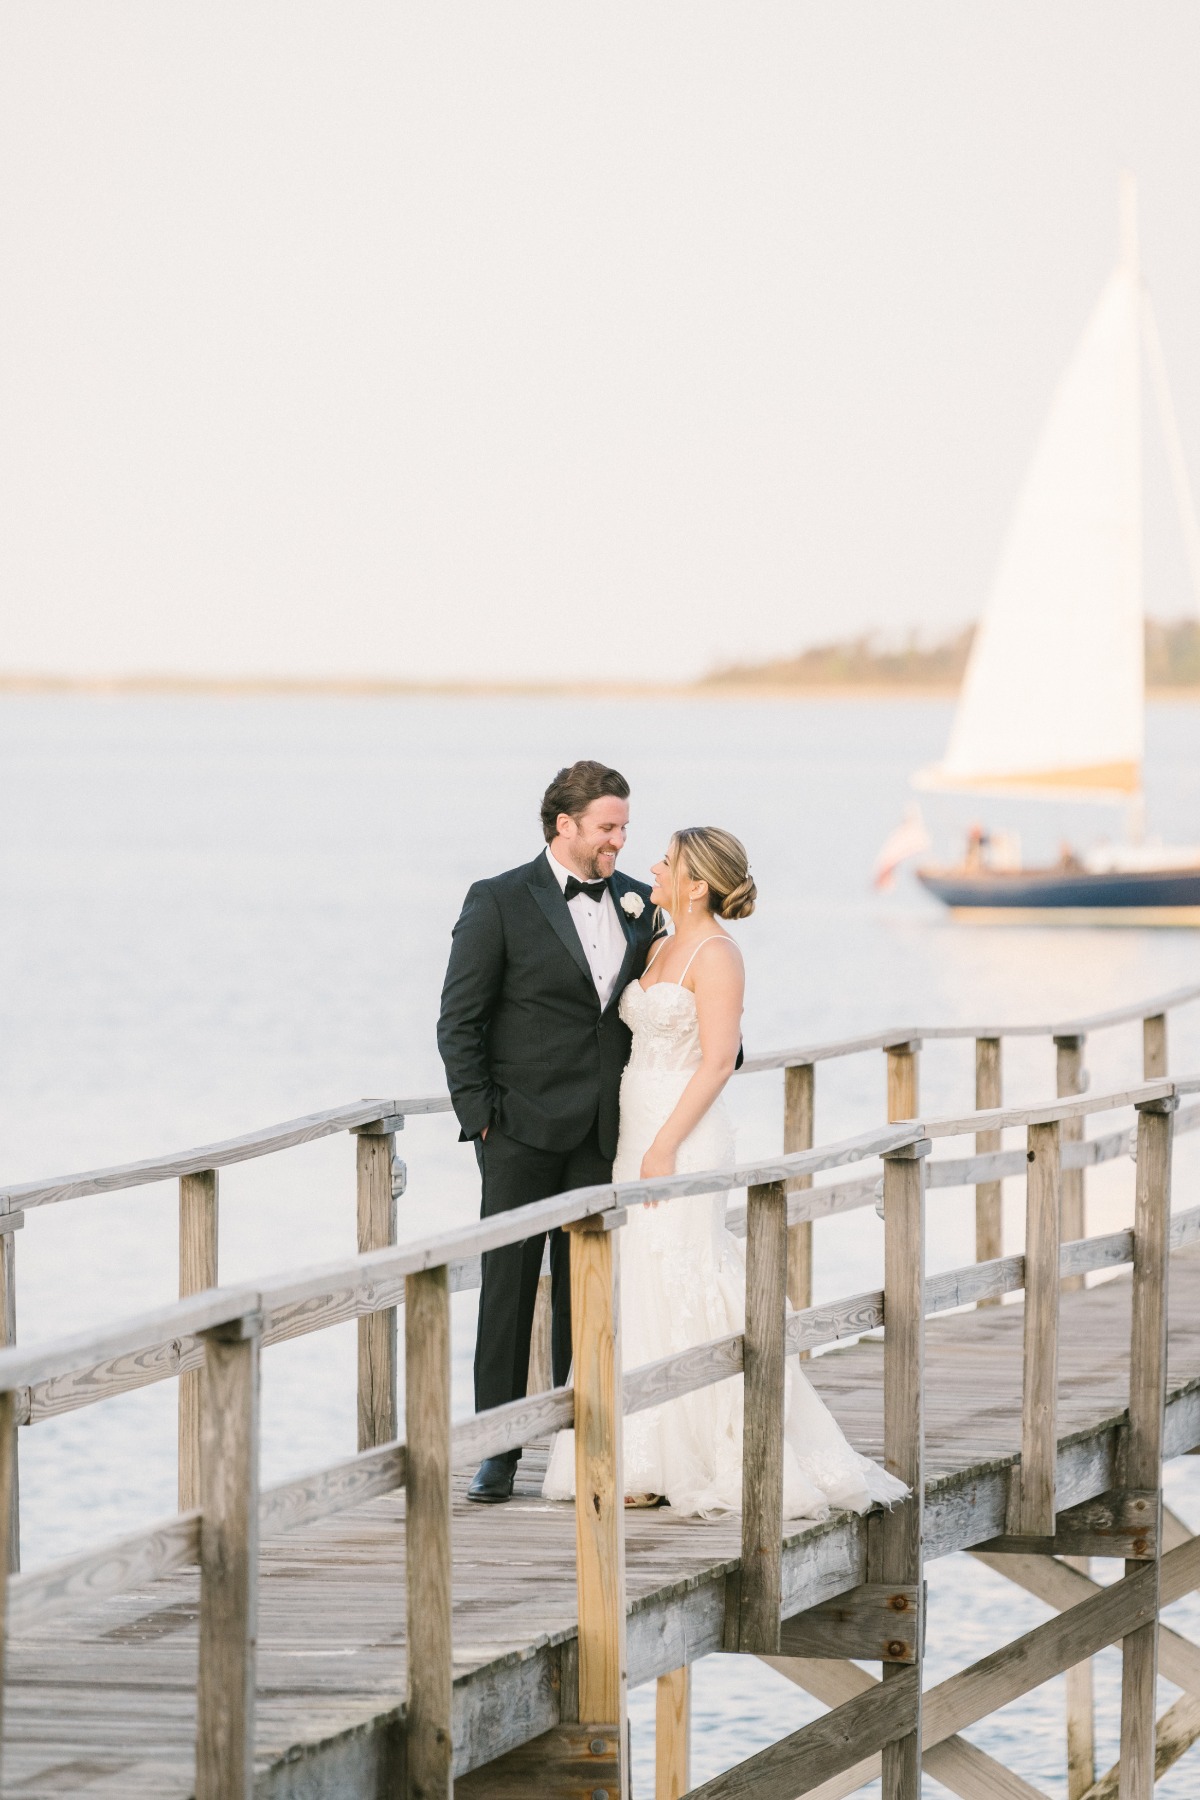 Cape Cod bride and groom sunset portraits on wooden pier